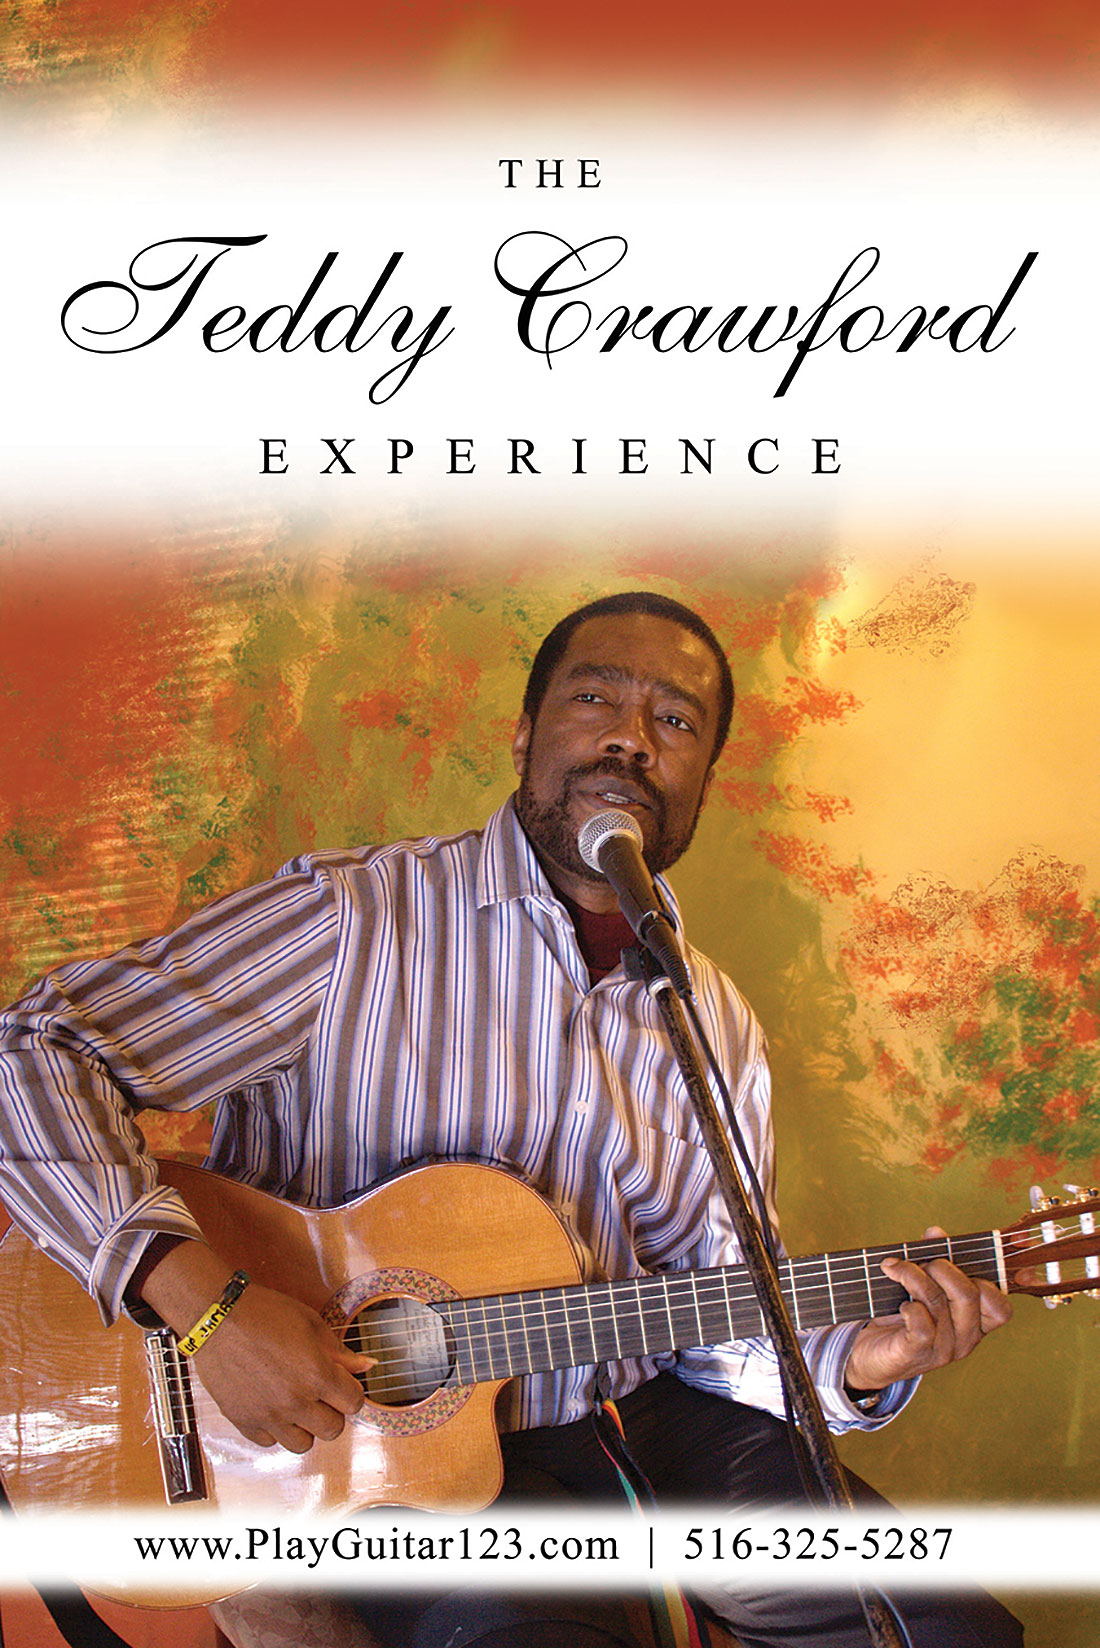 Teddy Crawford musicial instruction and perforomance brochure